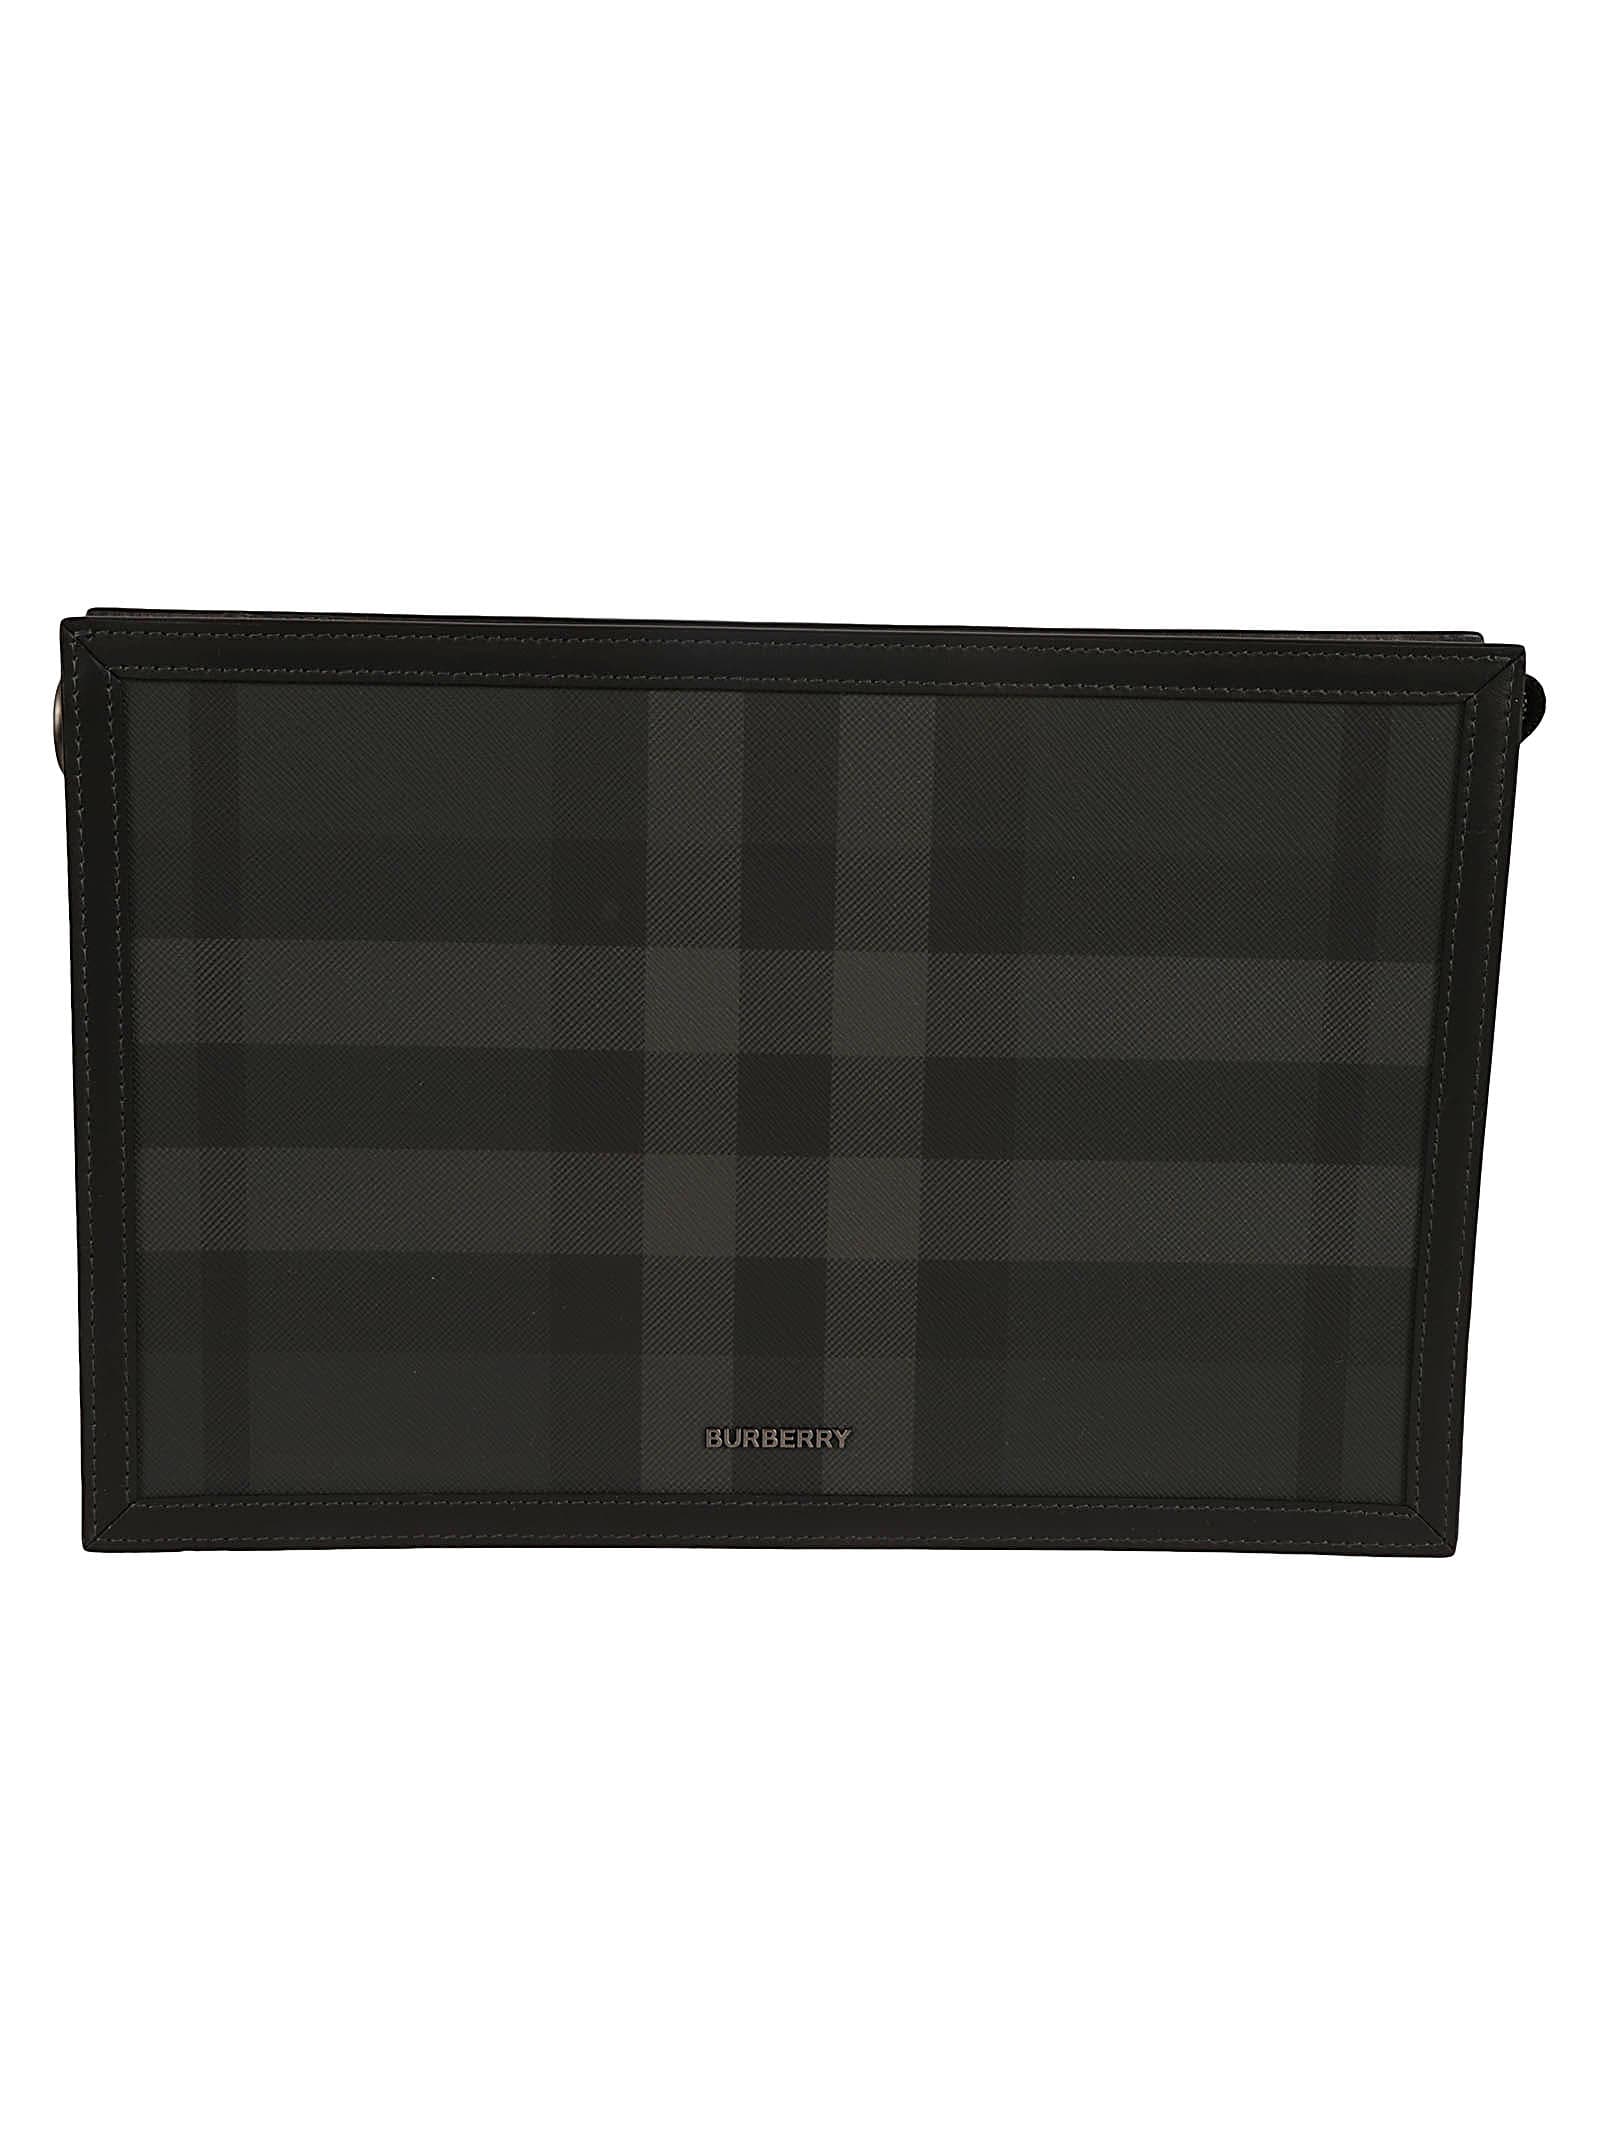 Burberry Frame Pouch In Charcoal